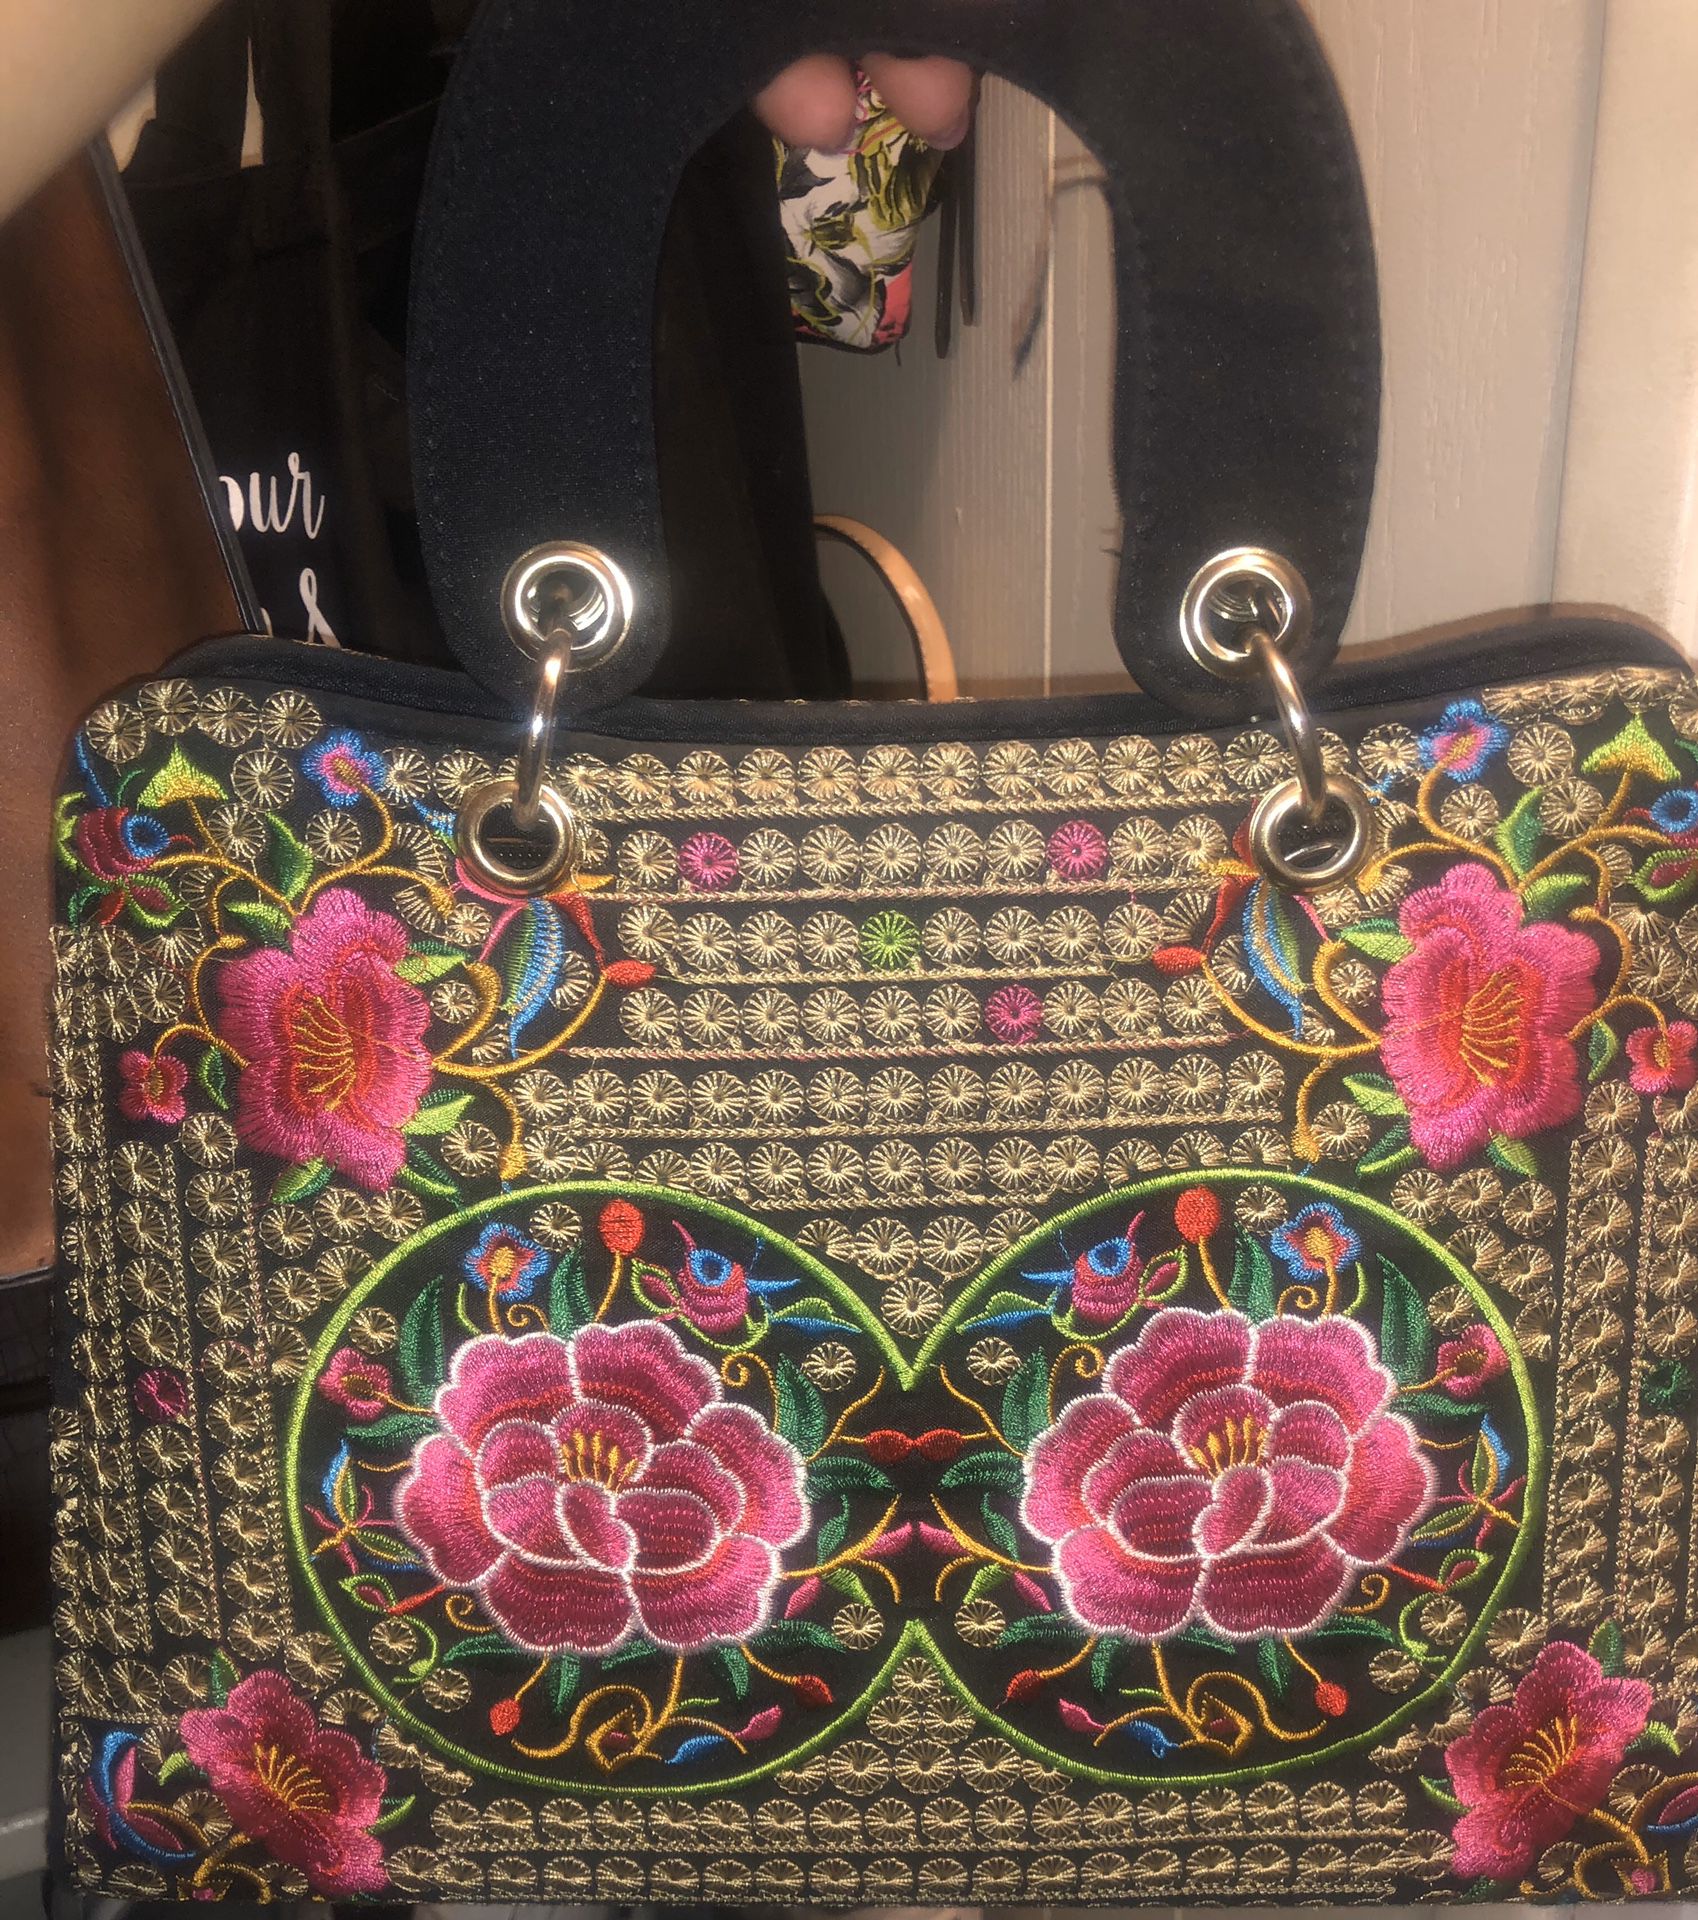 Embroidered bag from Mexico